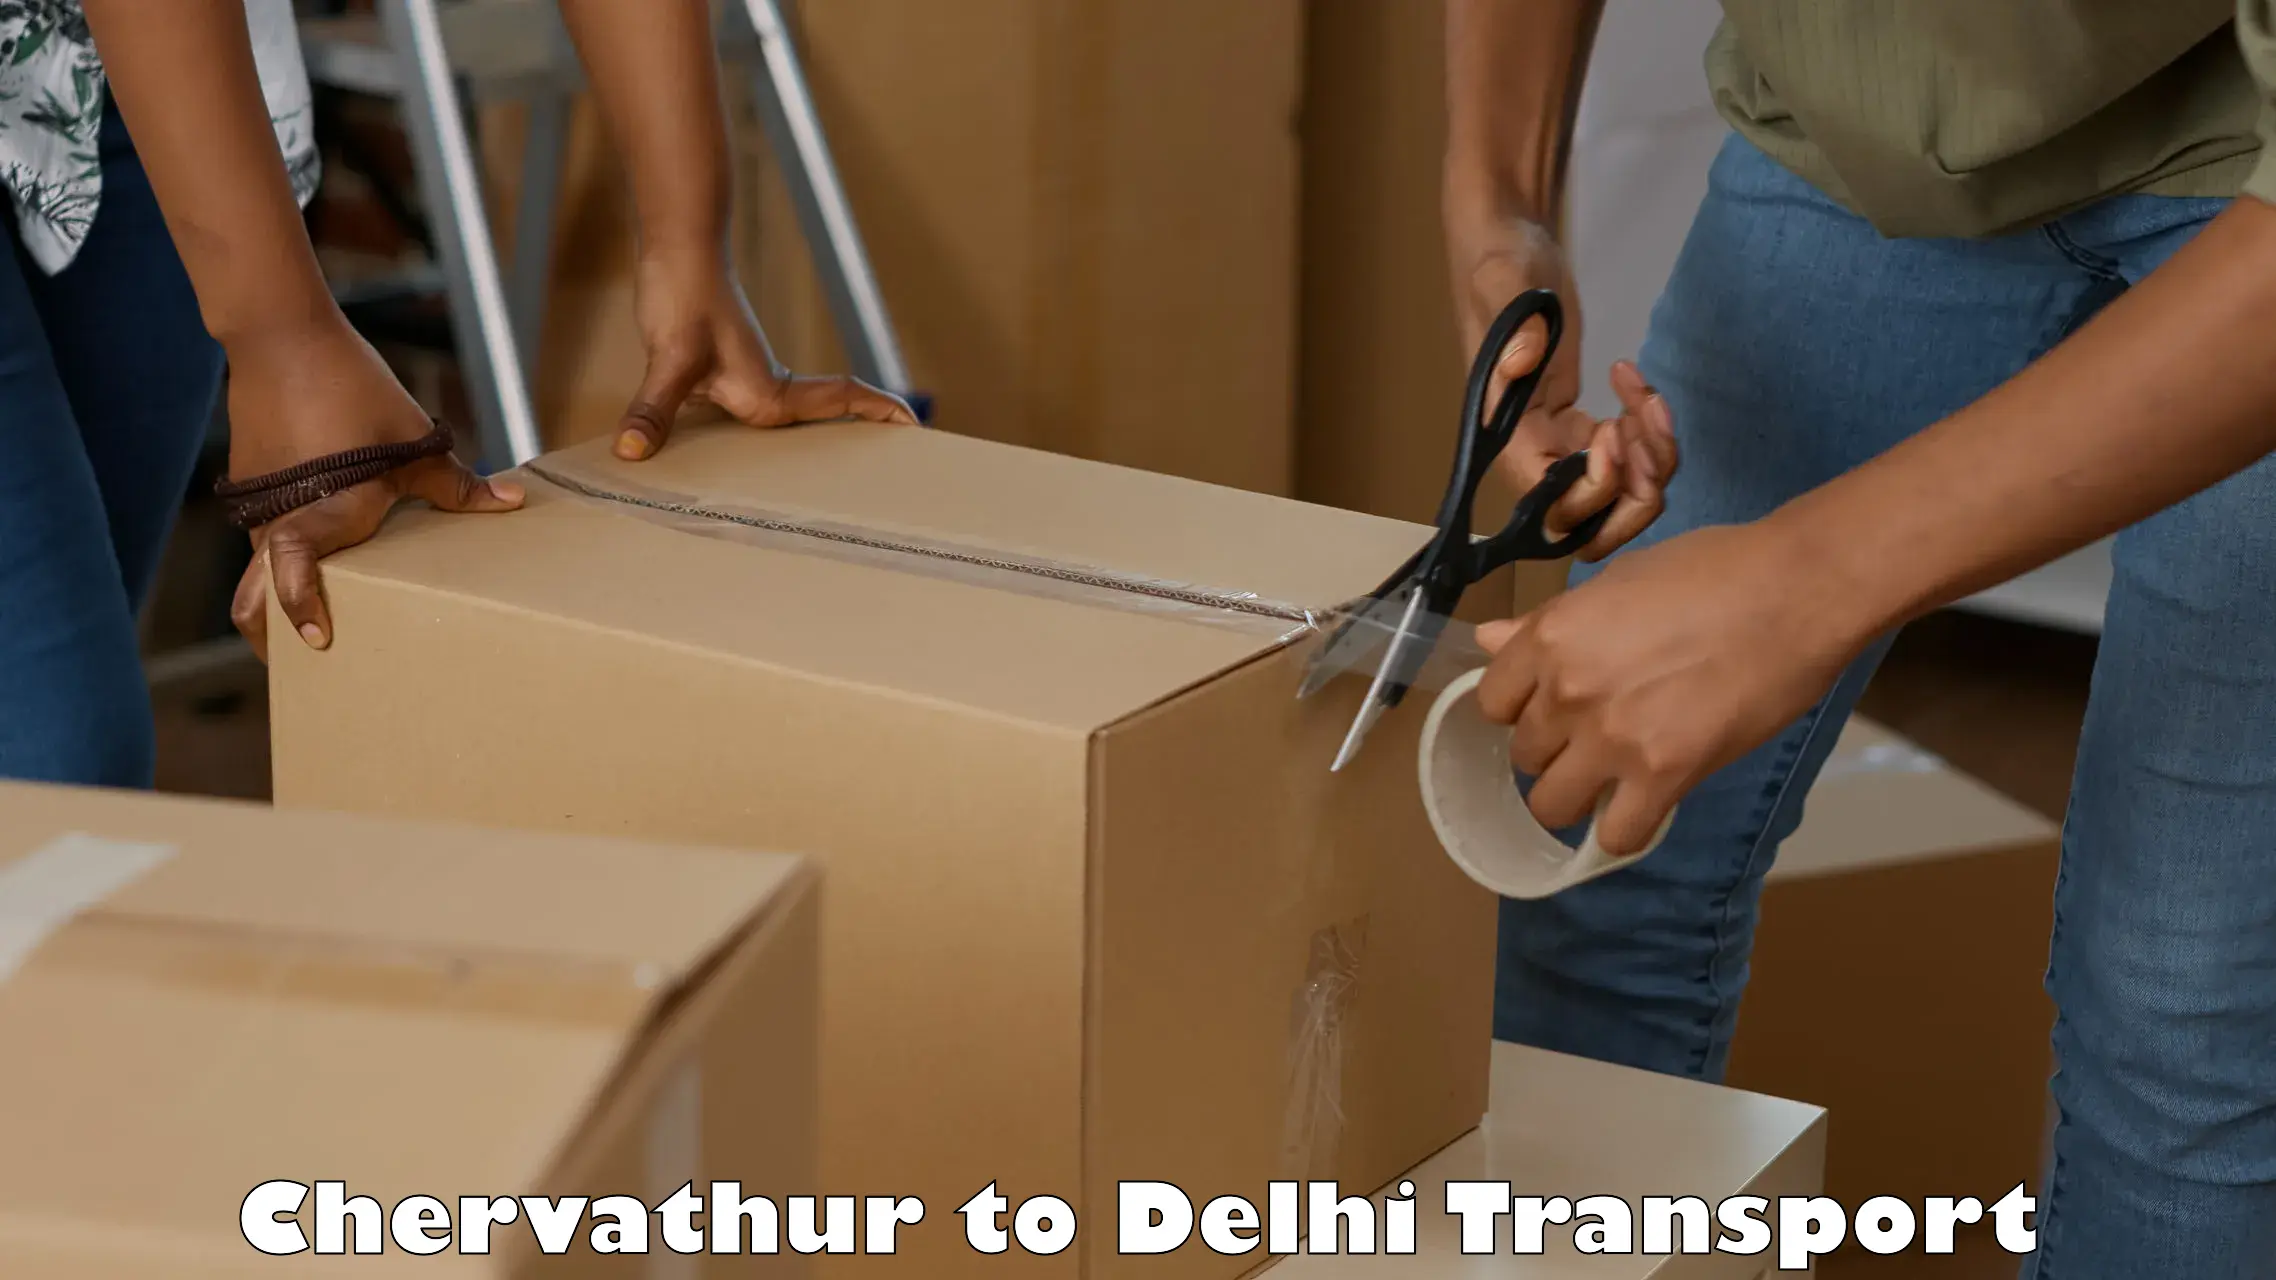 Truck transport companies in India Chervathur to Lodhi Road